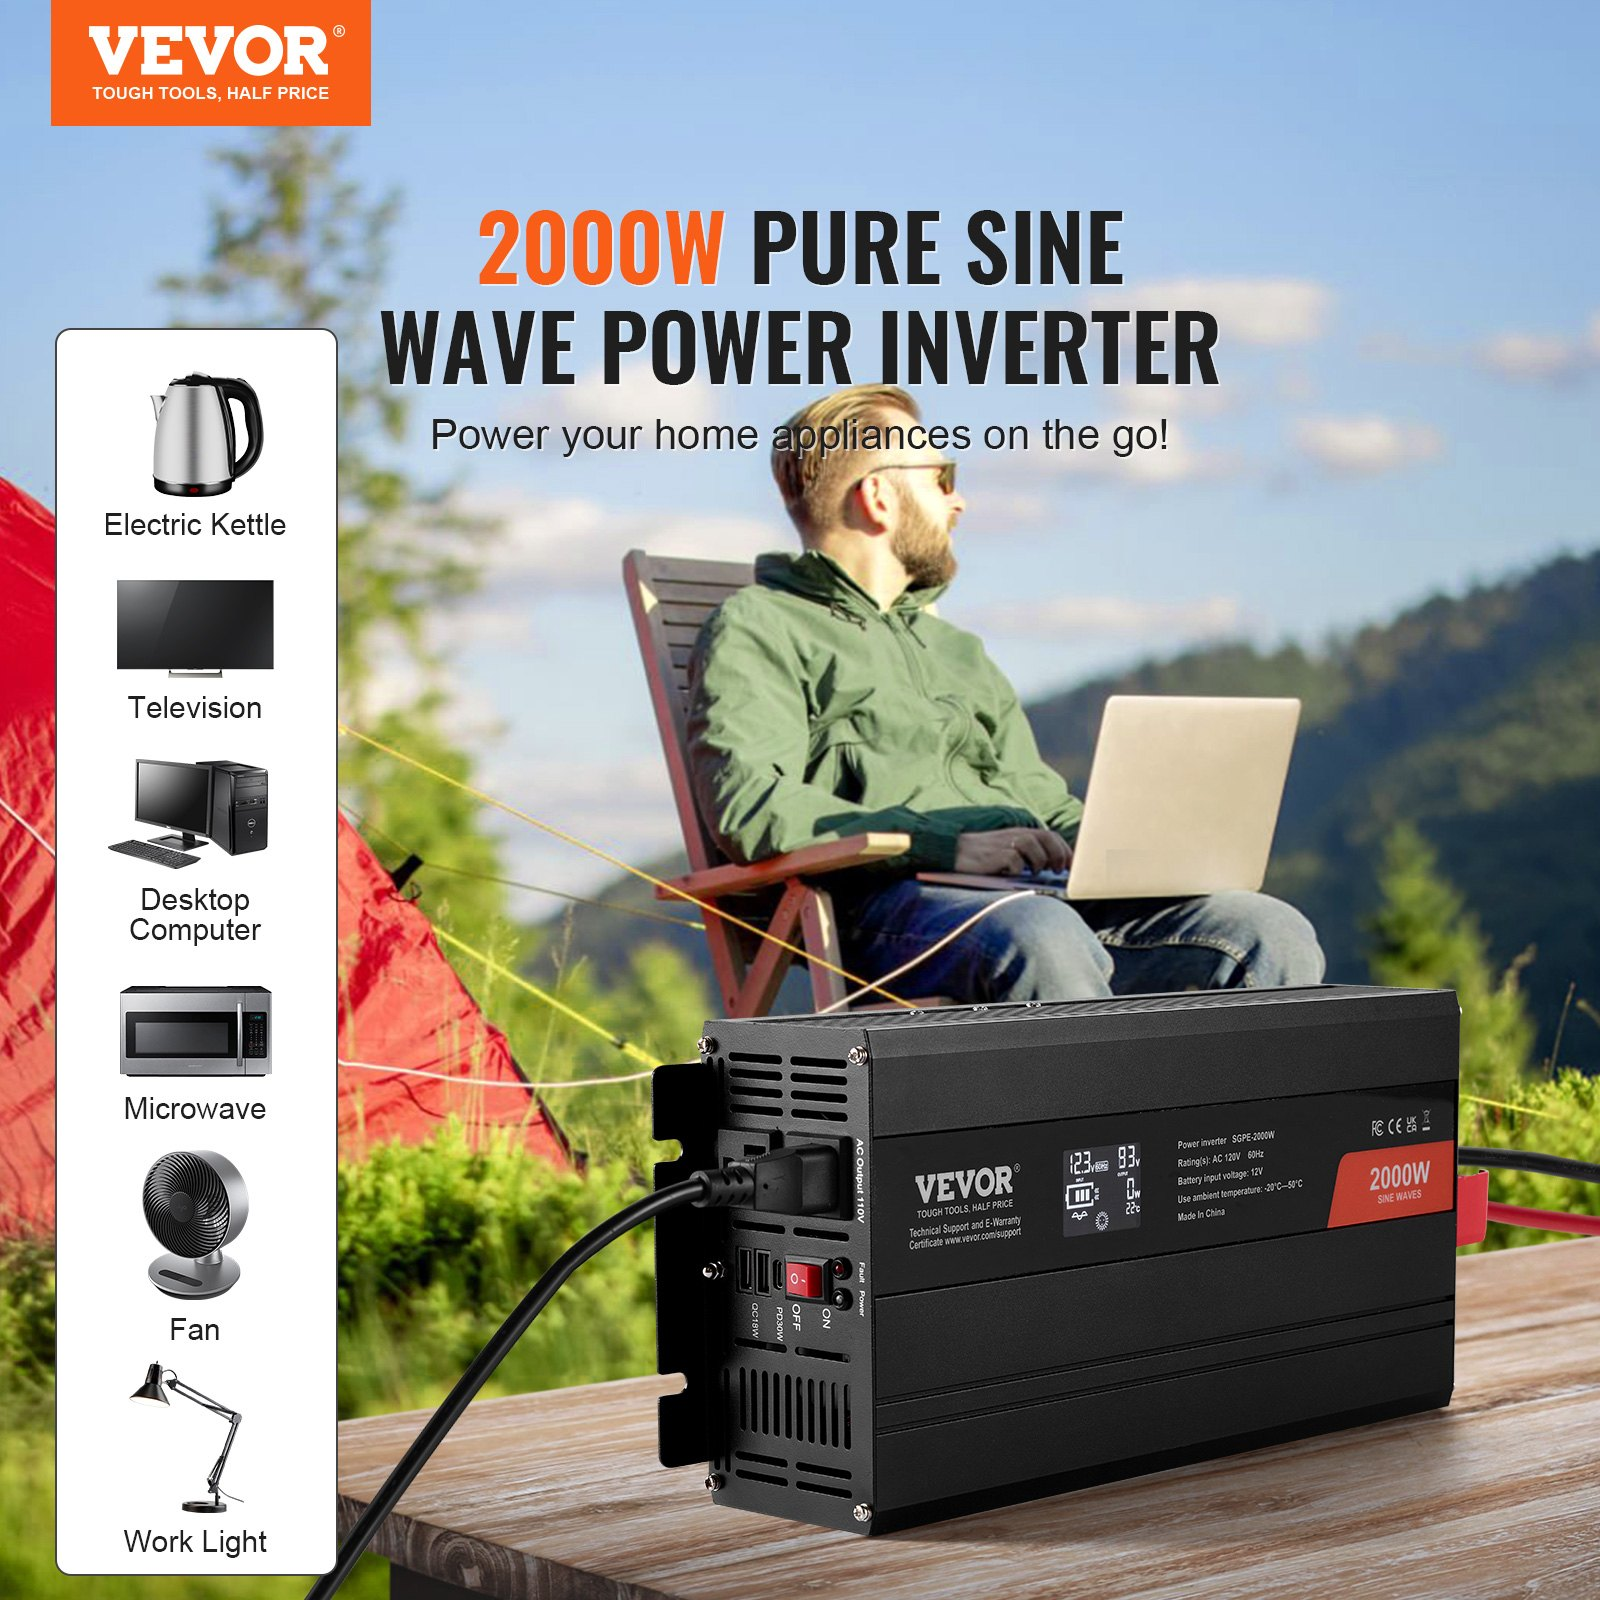 VEVOR Pure Sine Wave Inverter, 2000 Watt, DC 12V to AC 120V Power Inverter with 2 AC Outlets 2 USB Port 1 Type-C Port, LCD Display and Remote Controller for Medium-Sized Household Equipment, CE FCC, Goodies N Stuff